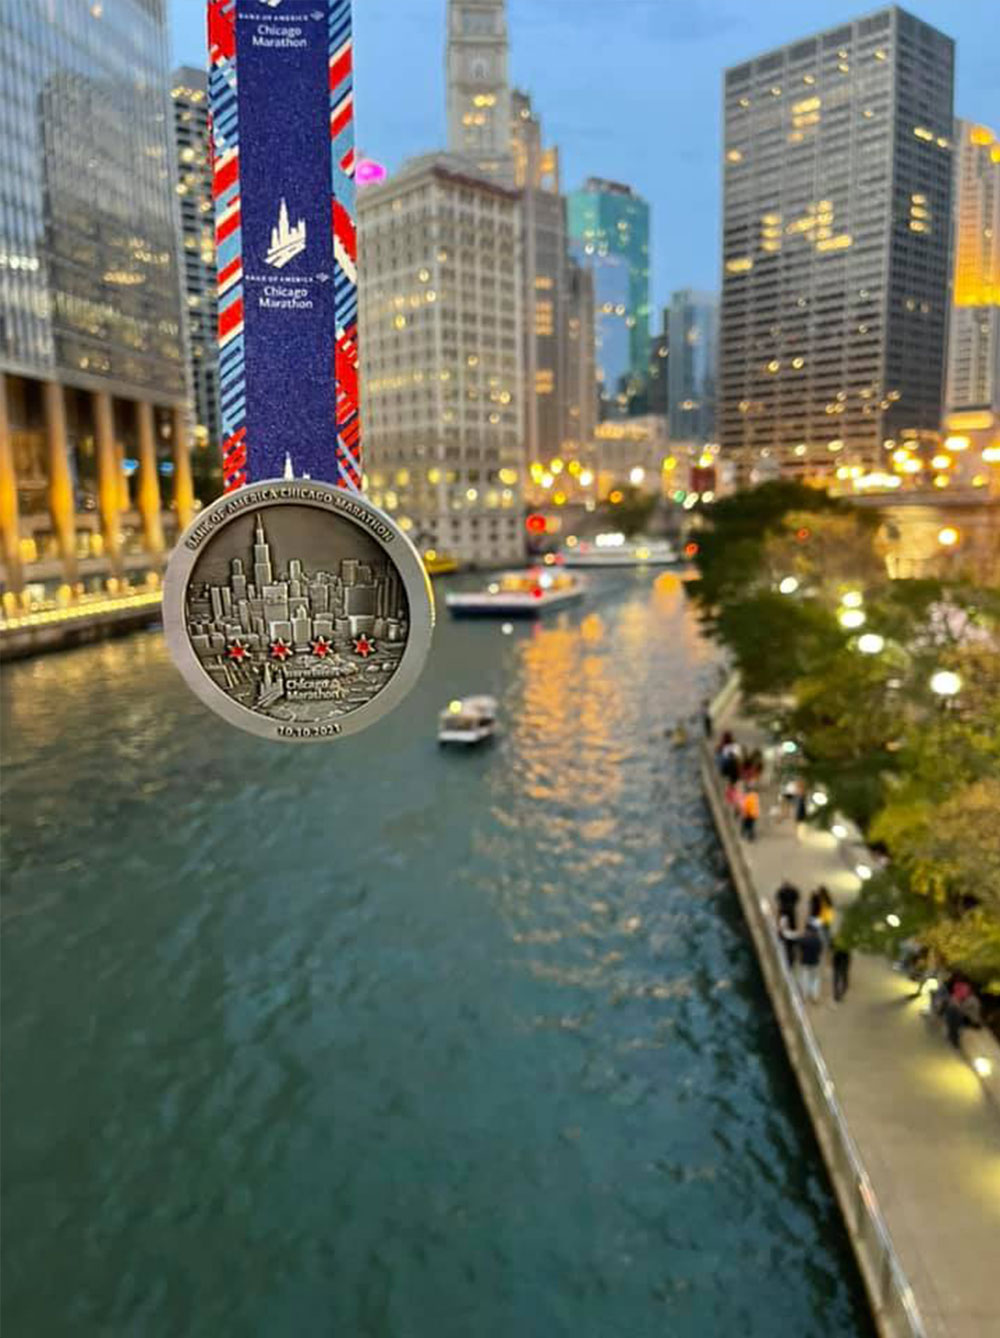 Eddie dangles his medal over the Chicago River